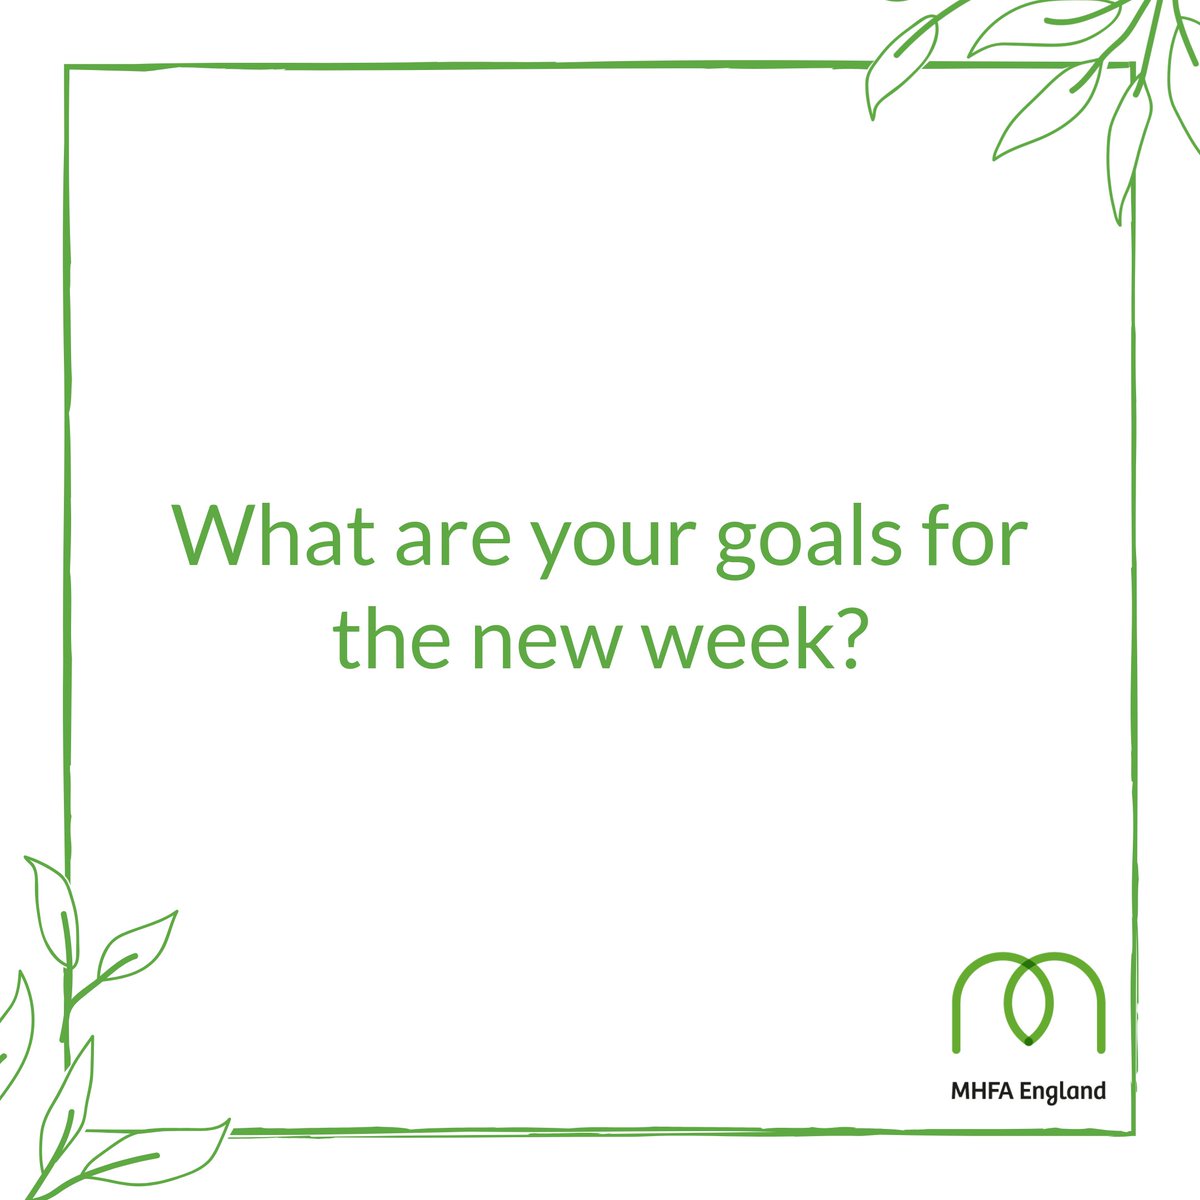 From taking regular screen breaks, journaling daily, drinking more water or eating a nourishing meal. What are your  #selfcare goals for the week?  #mondaythoughts  #StressAwarenessMonth